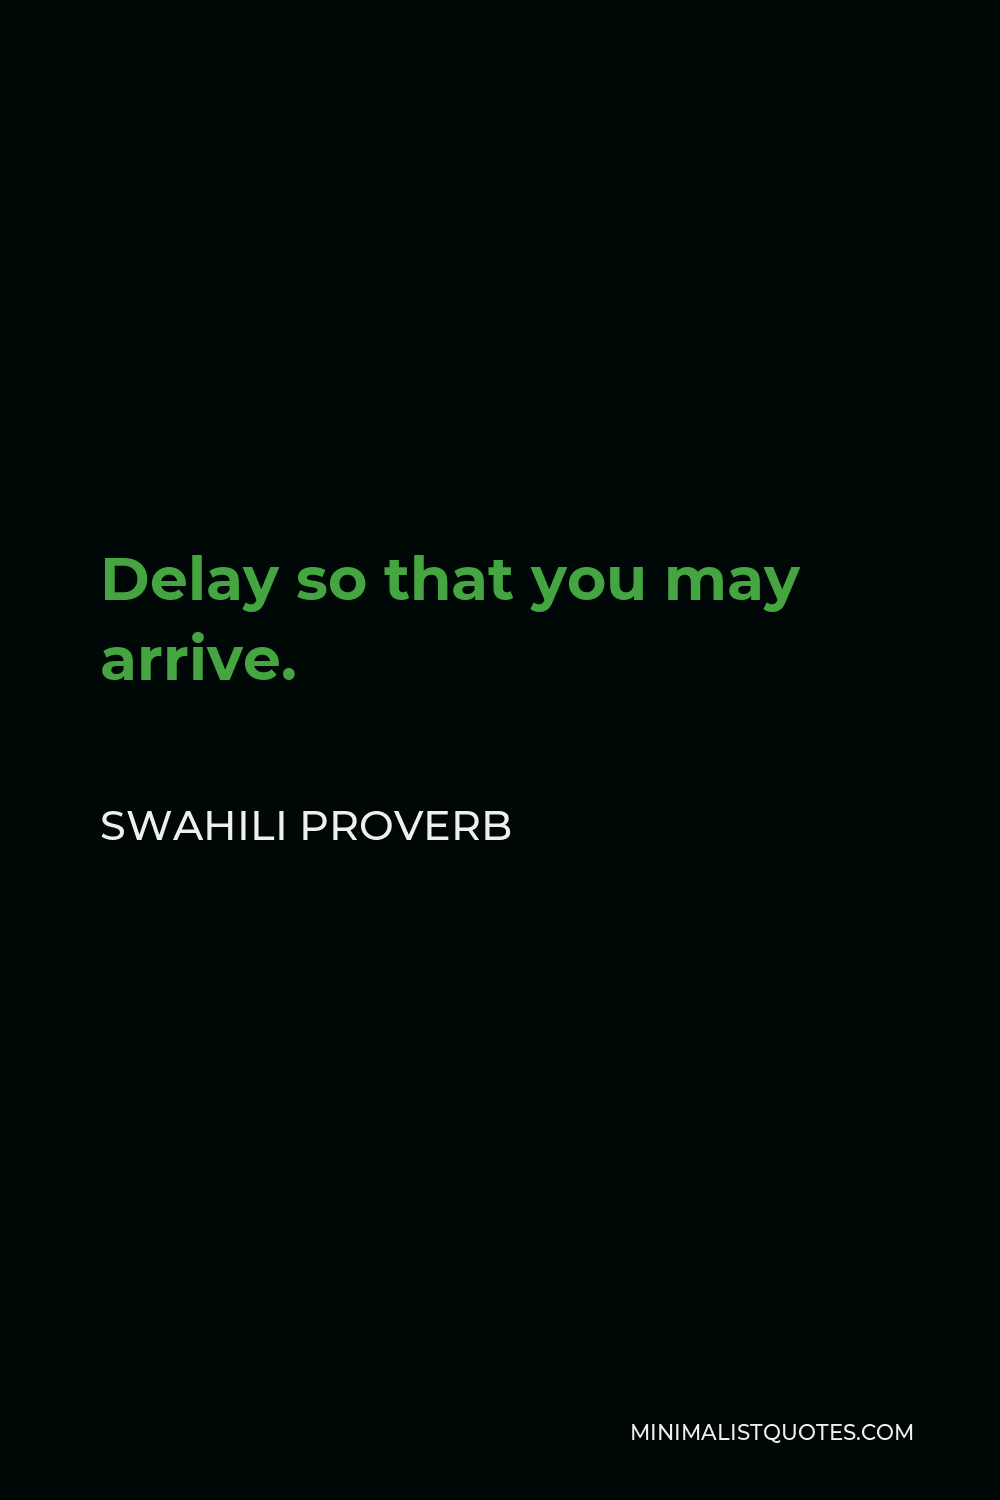 Swahili Proverb Quote - Delay so that you may arrive.